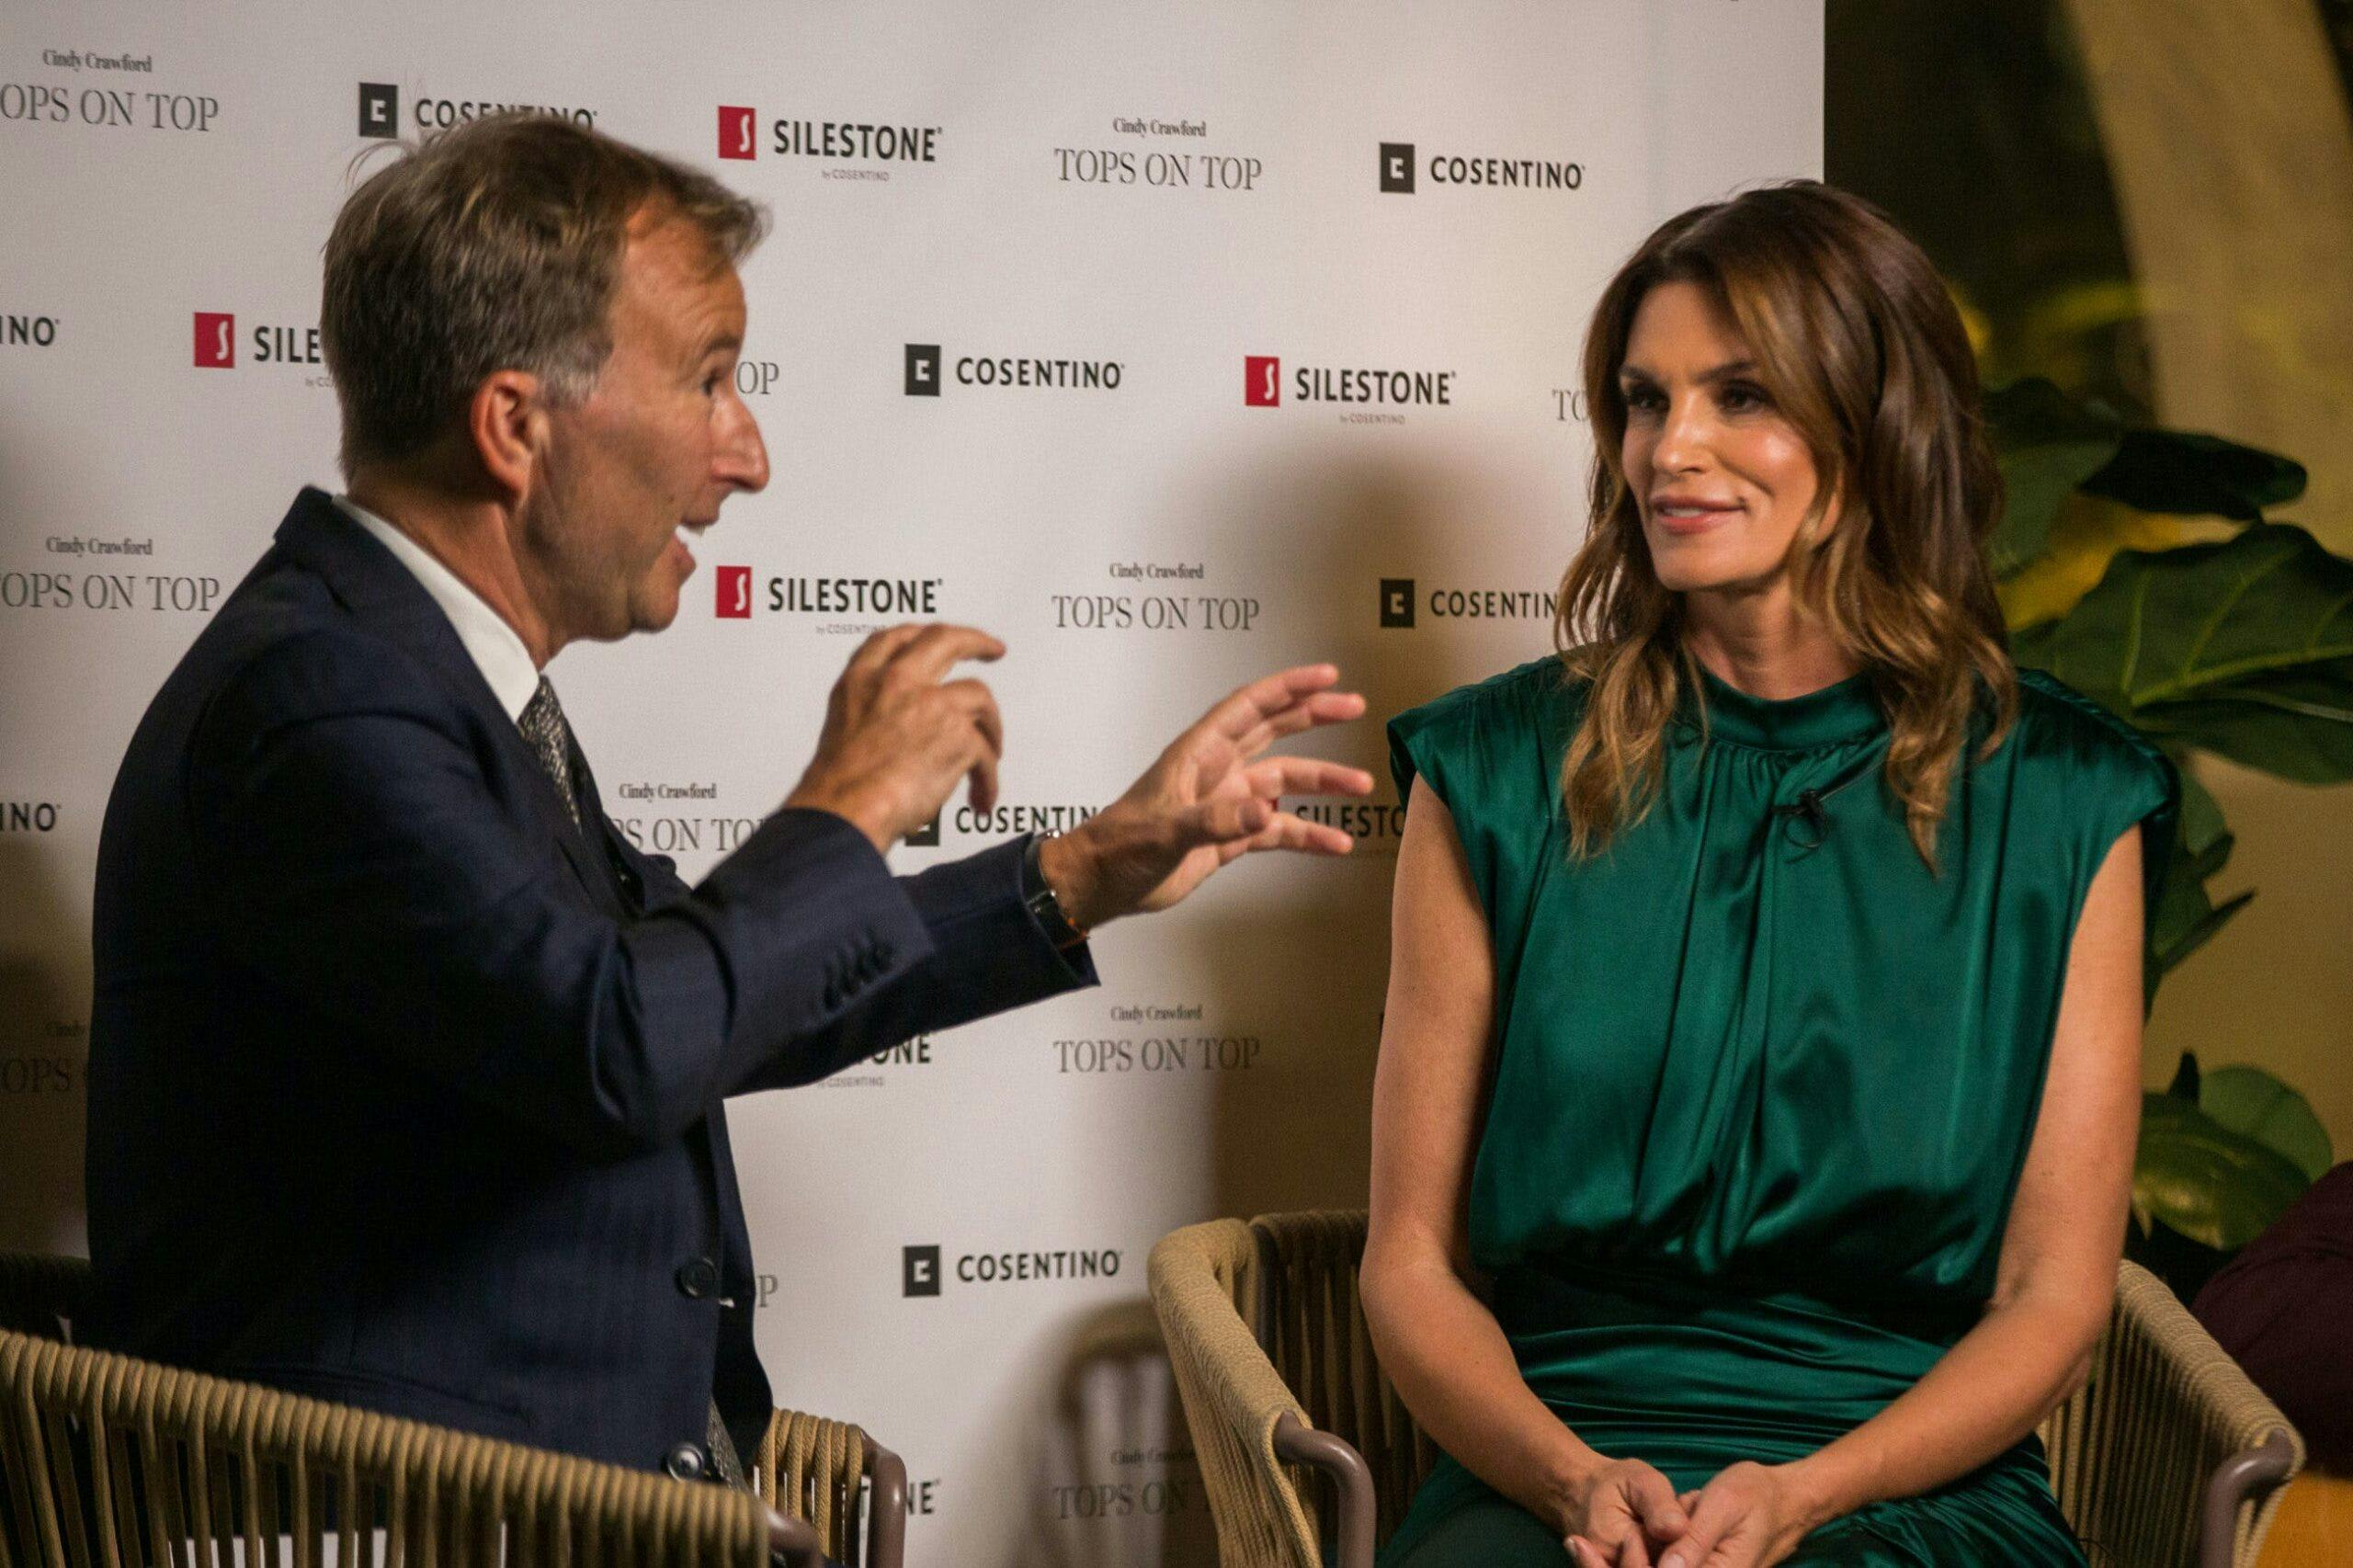 Image 35 of Tony Chambers y Cindy Crawford Silestone Londres 3 scaled in Silestone® Presents its New "Tops on Top 2019" Campaign Featuring Cindy Crawford - Cosentino